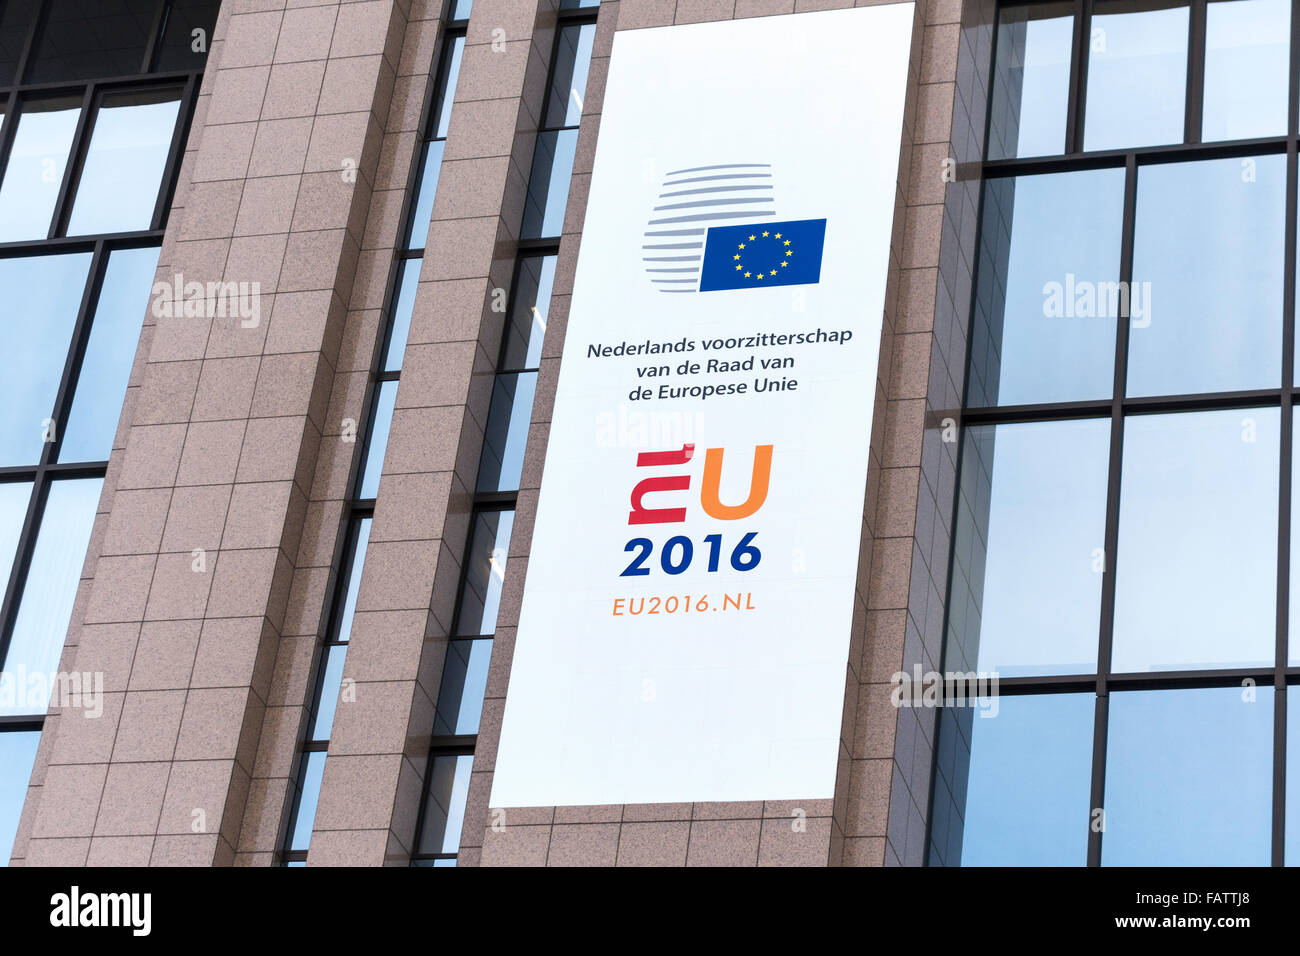 Brussels Dutch EU Council Presidency 2016 logo banner on the European Council Building in Brussels Belgium on January 1st 2016. Stock Photo